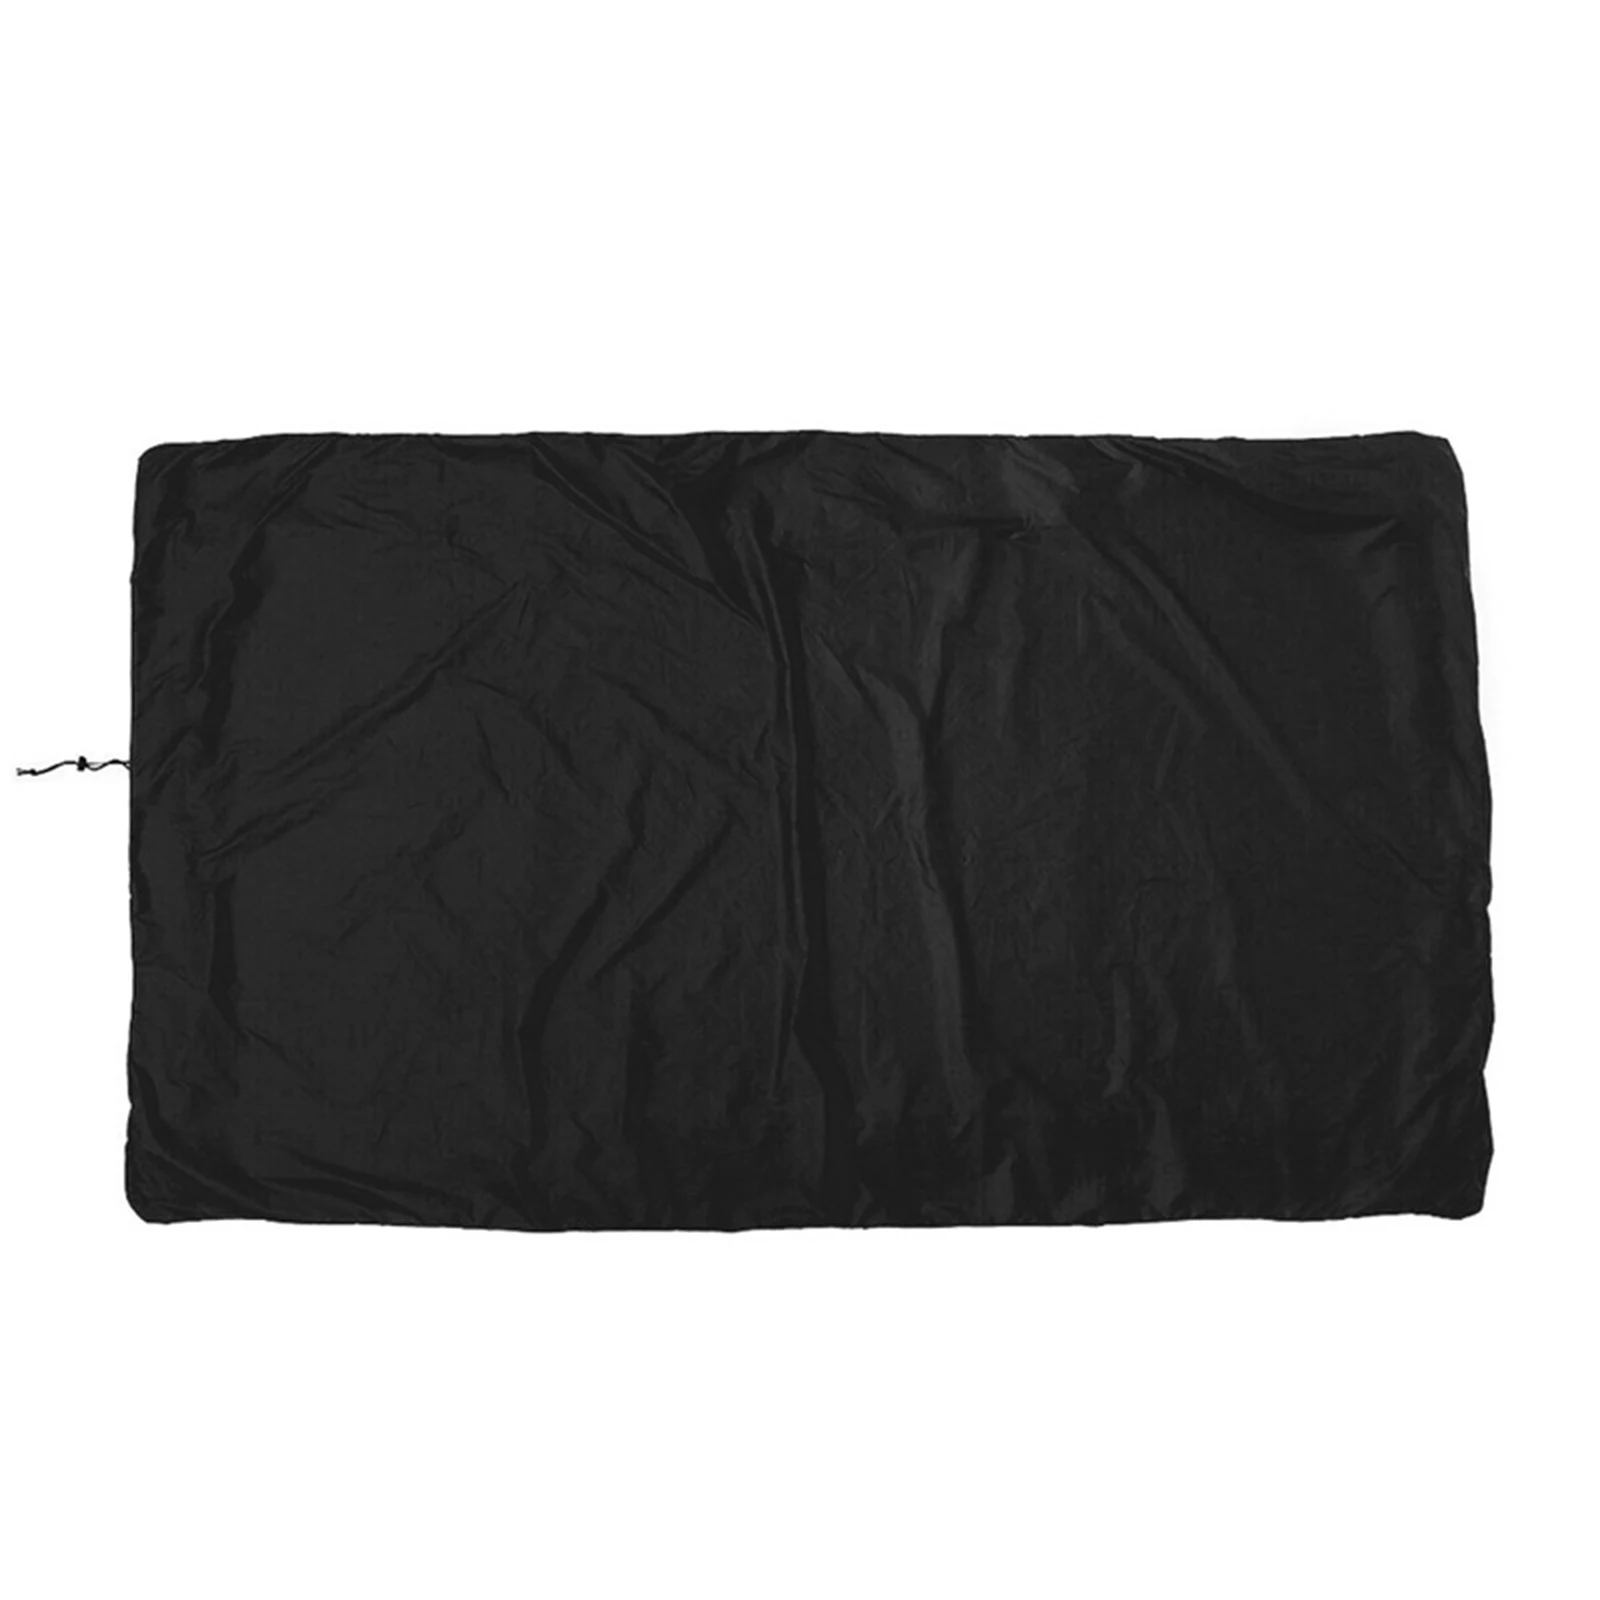 

Billiard Pool Table Cover Heavy Duty Waterproof Sun Rain Snow Dust Protection 600D Oxford Cloth For Furniture Covers